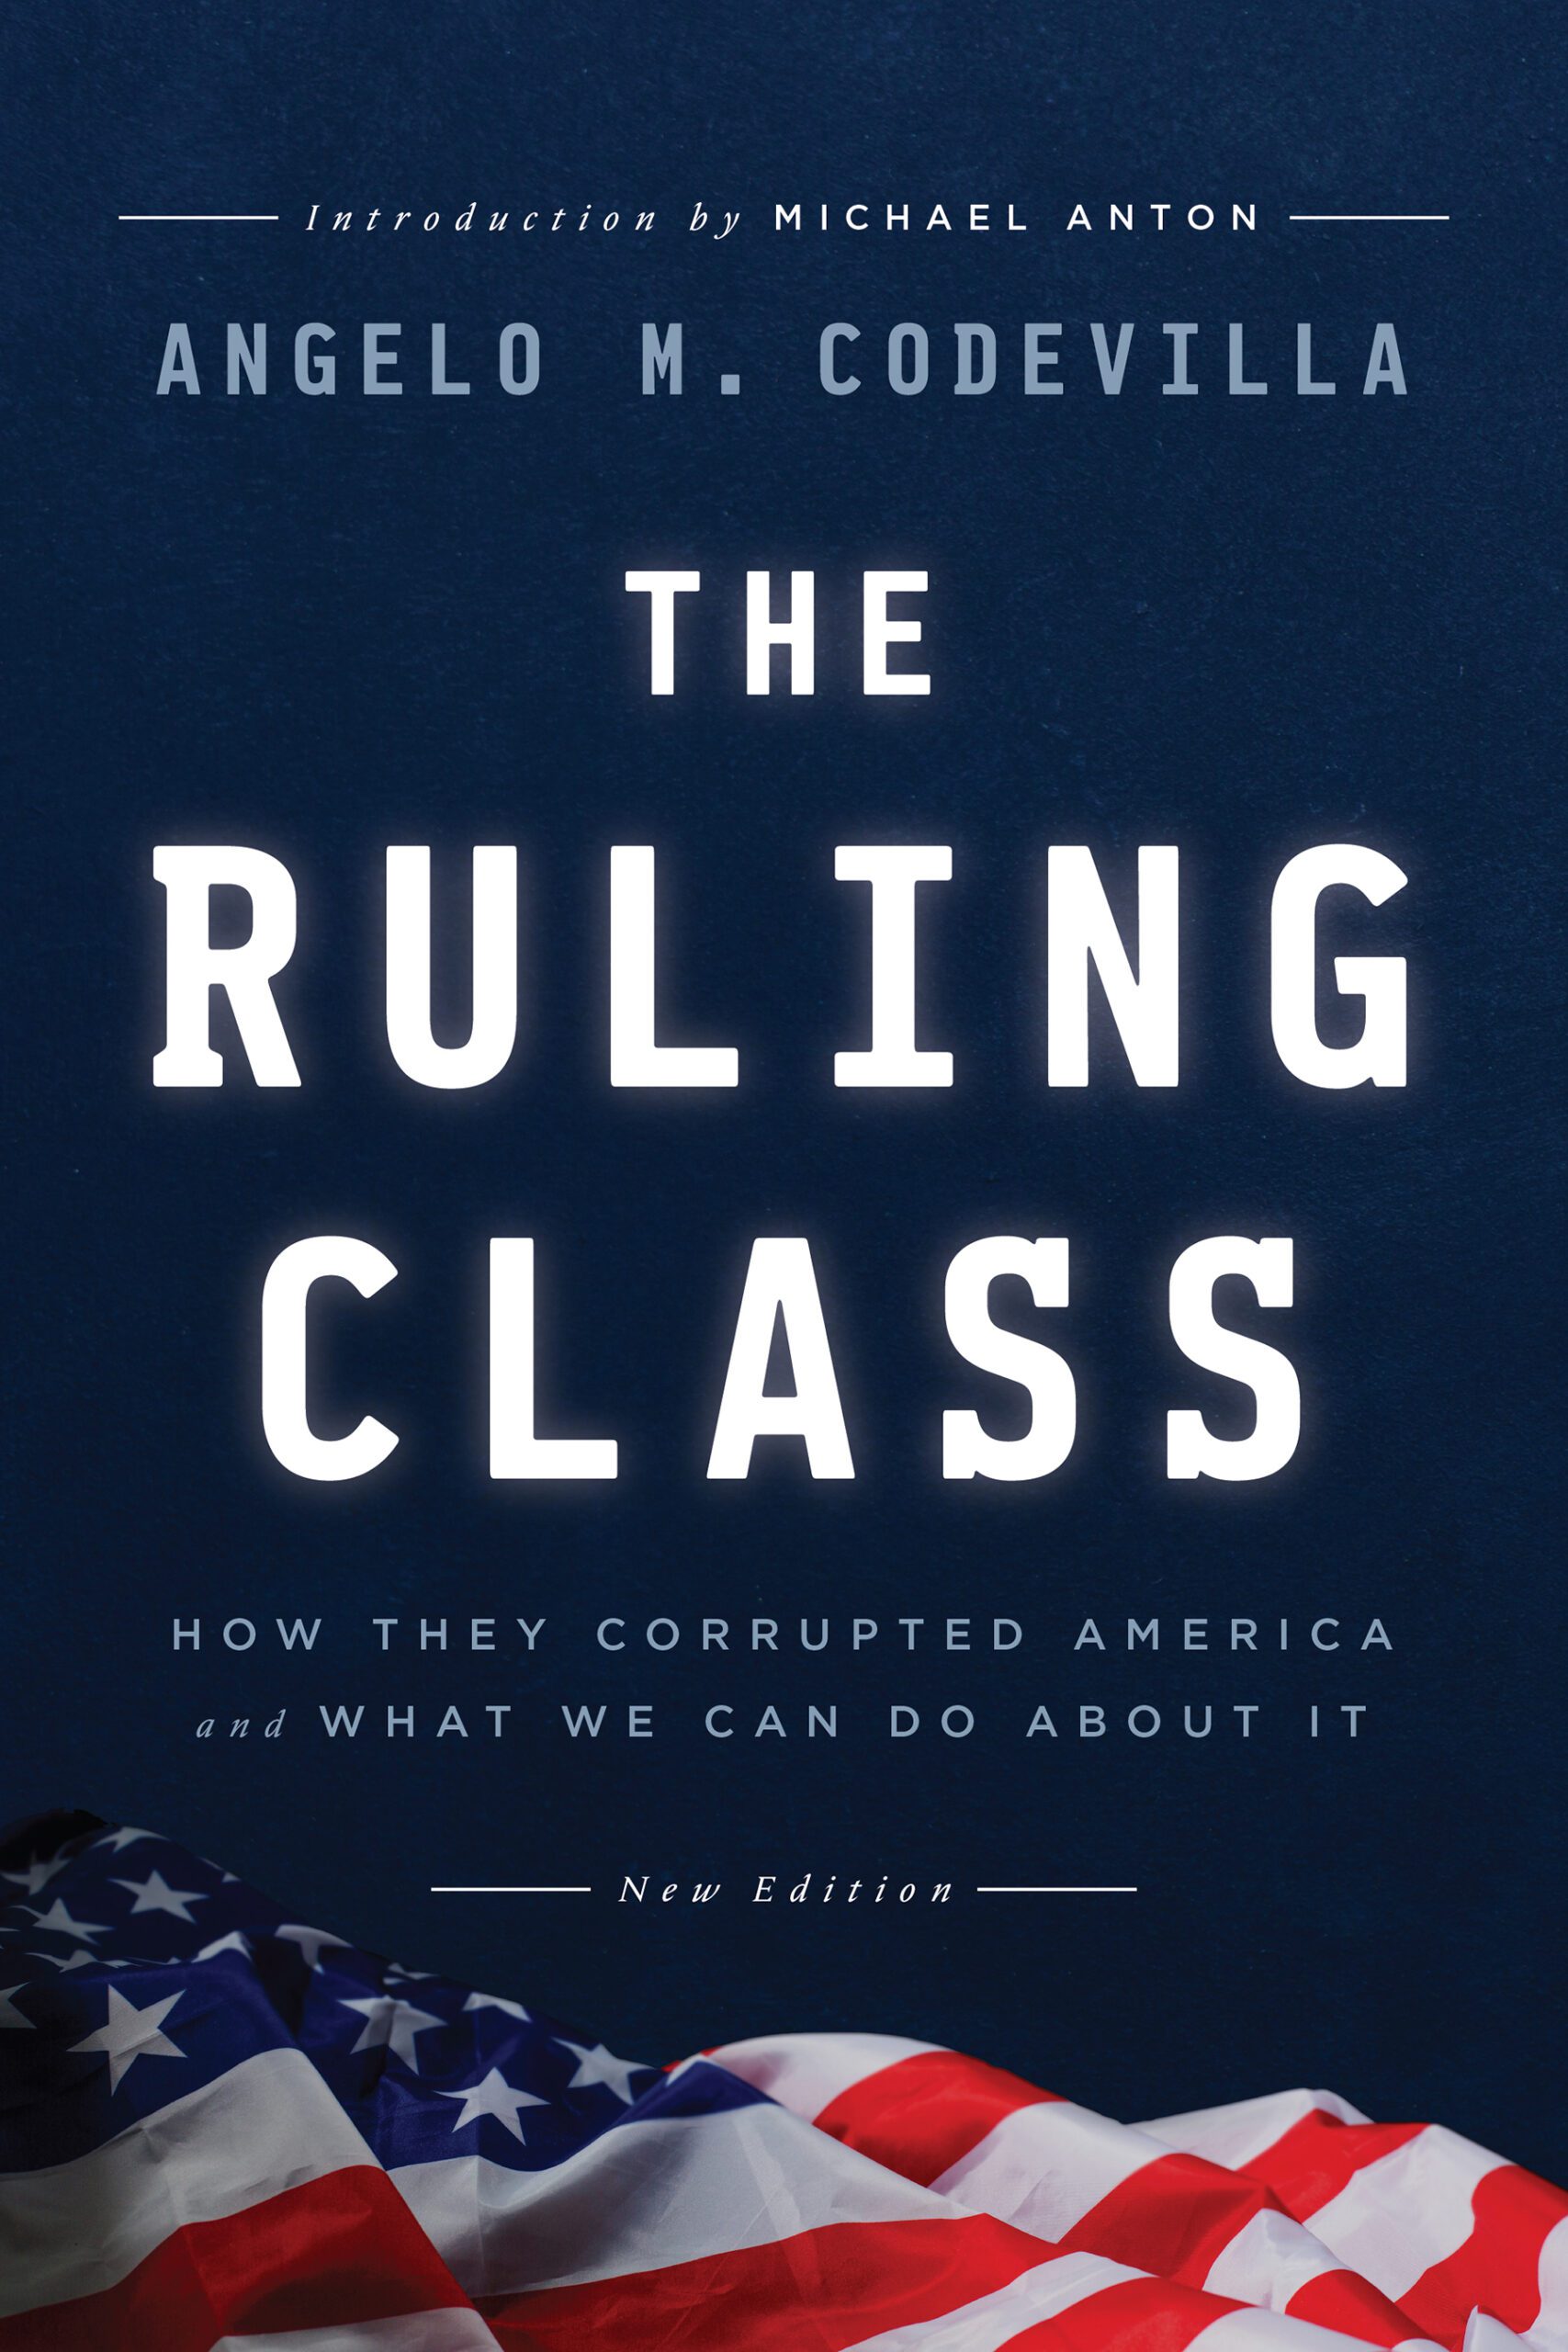 The Ruling Class by Angelo M. Codevilla